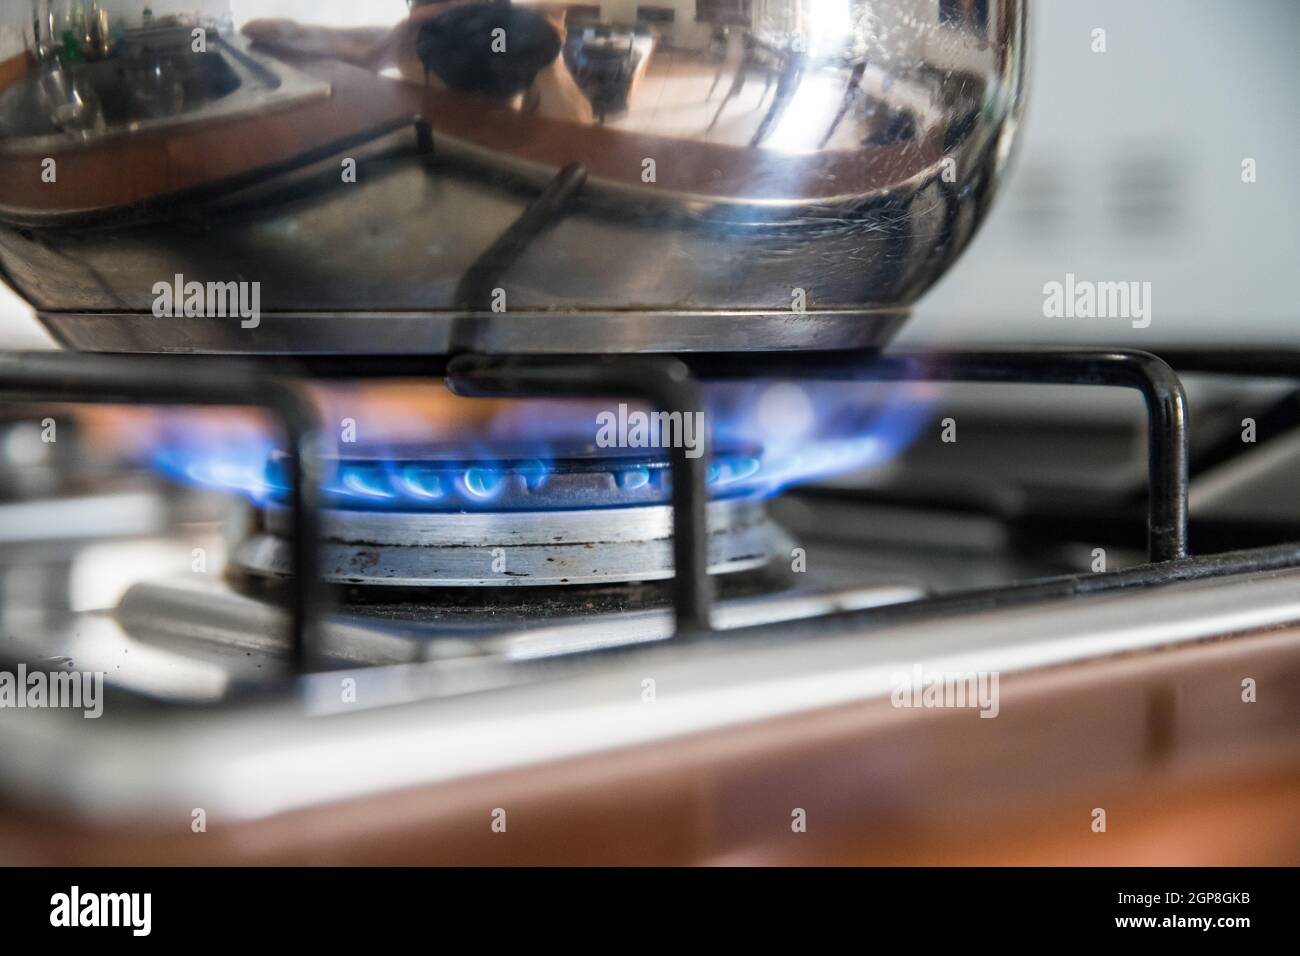 https://c8.alamy.com/comp/2GP8GKB/close-up-of-a-blue-gas-flame-cooking-a-water-pot-in-kitchen-2GP8GKB.jpg